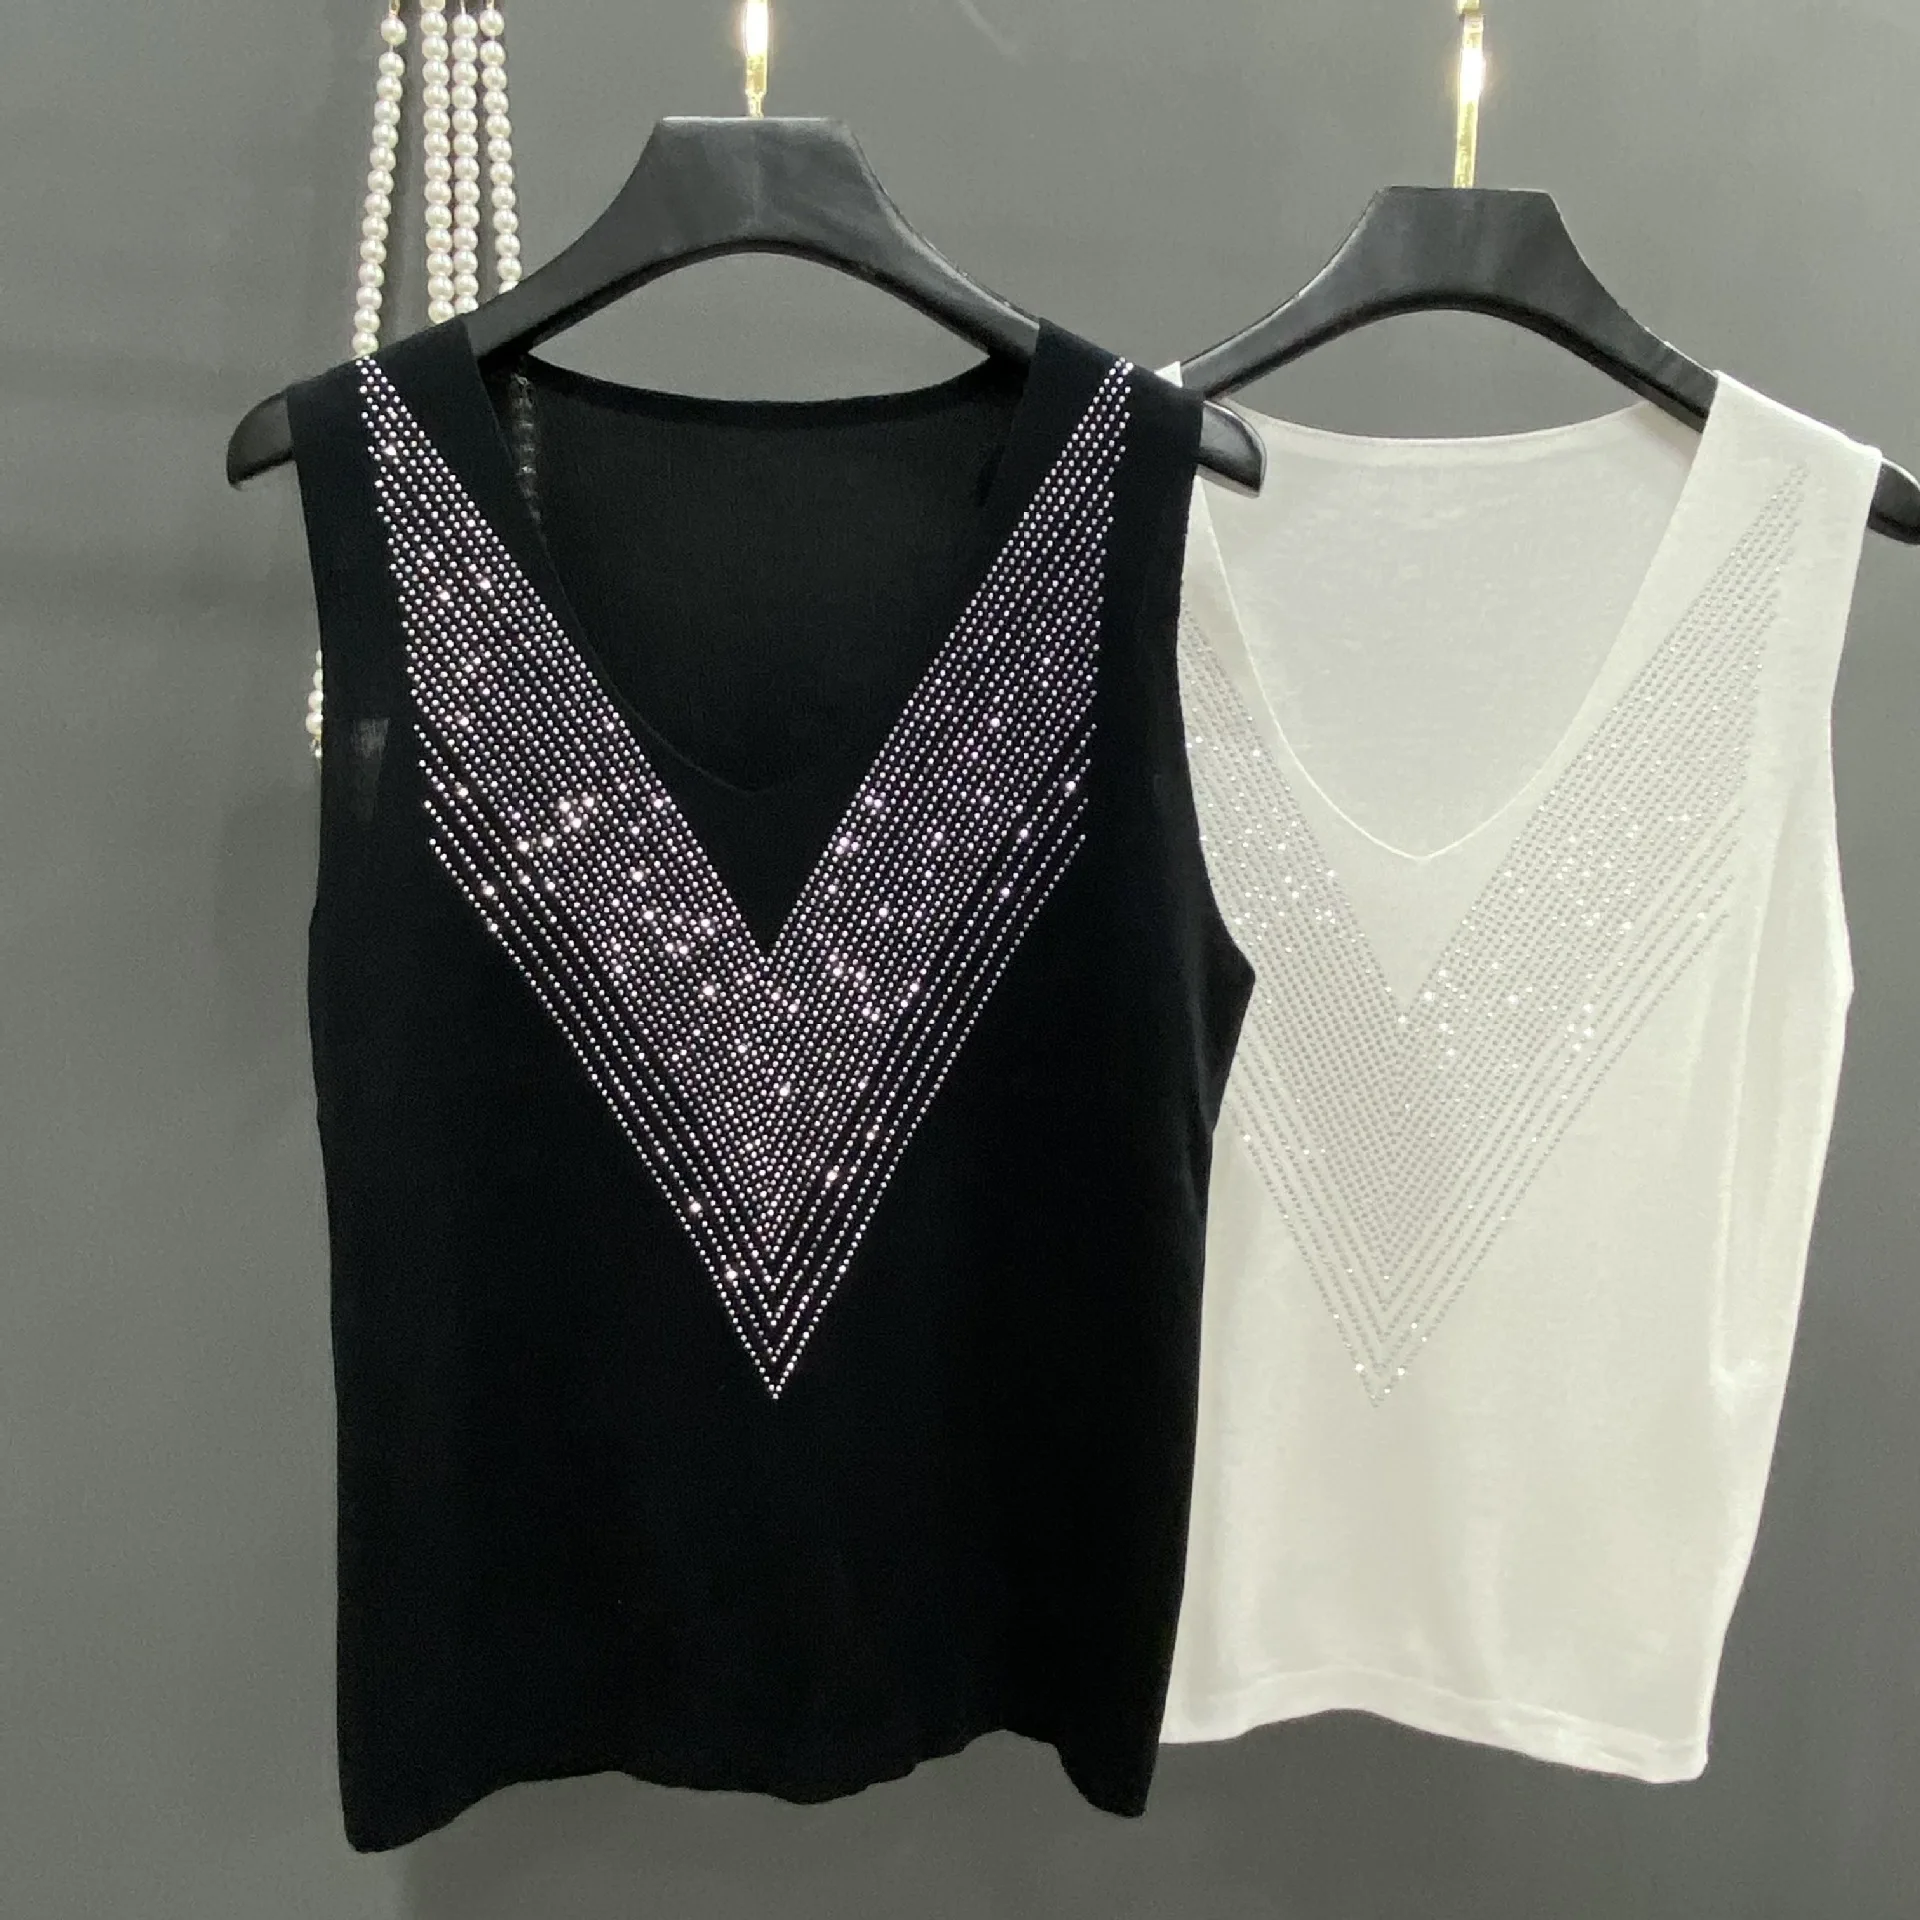 

Women Slim Diamonds Vest Solid Color Stretchy Sleeveless Tees Summer Thin Glitter Camis Tank Tops Clothing Chaleco de verano